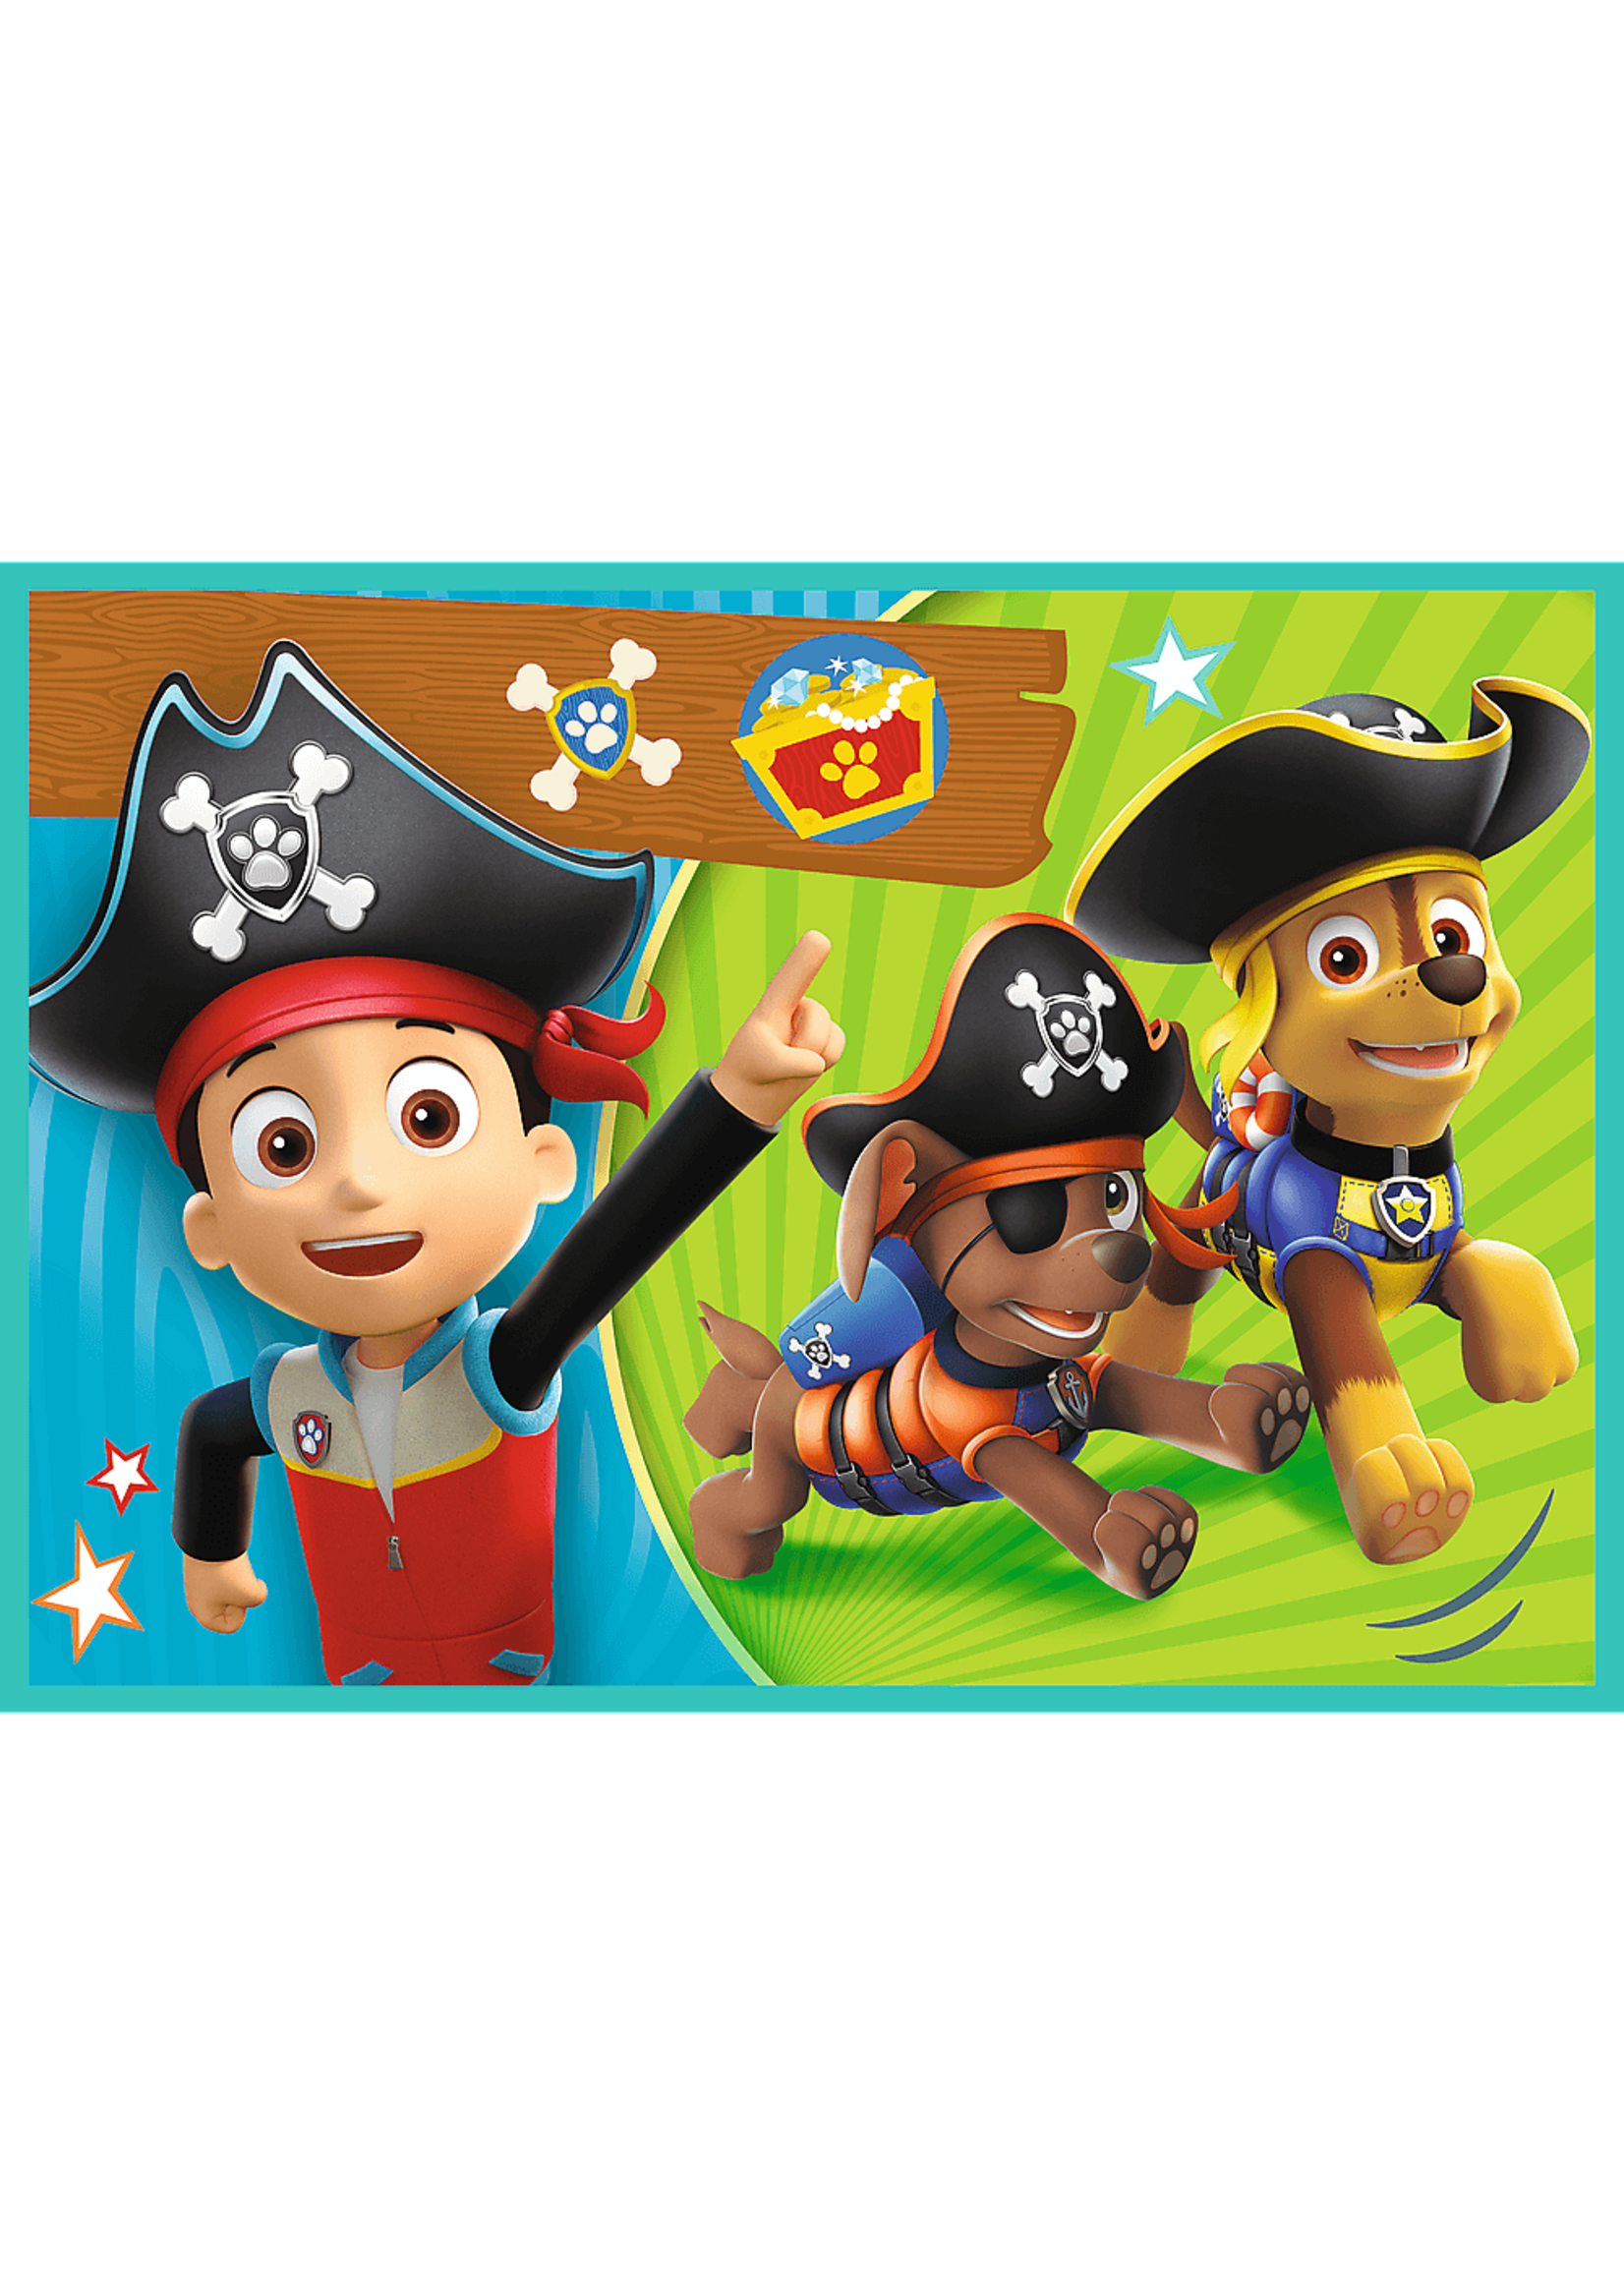 Nickelodeon Paw Patrol 4 in 1 puzzle from Nickelodeon